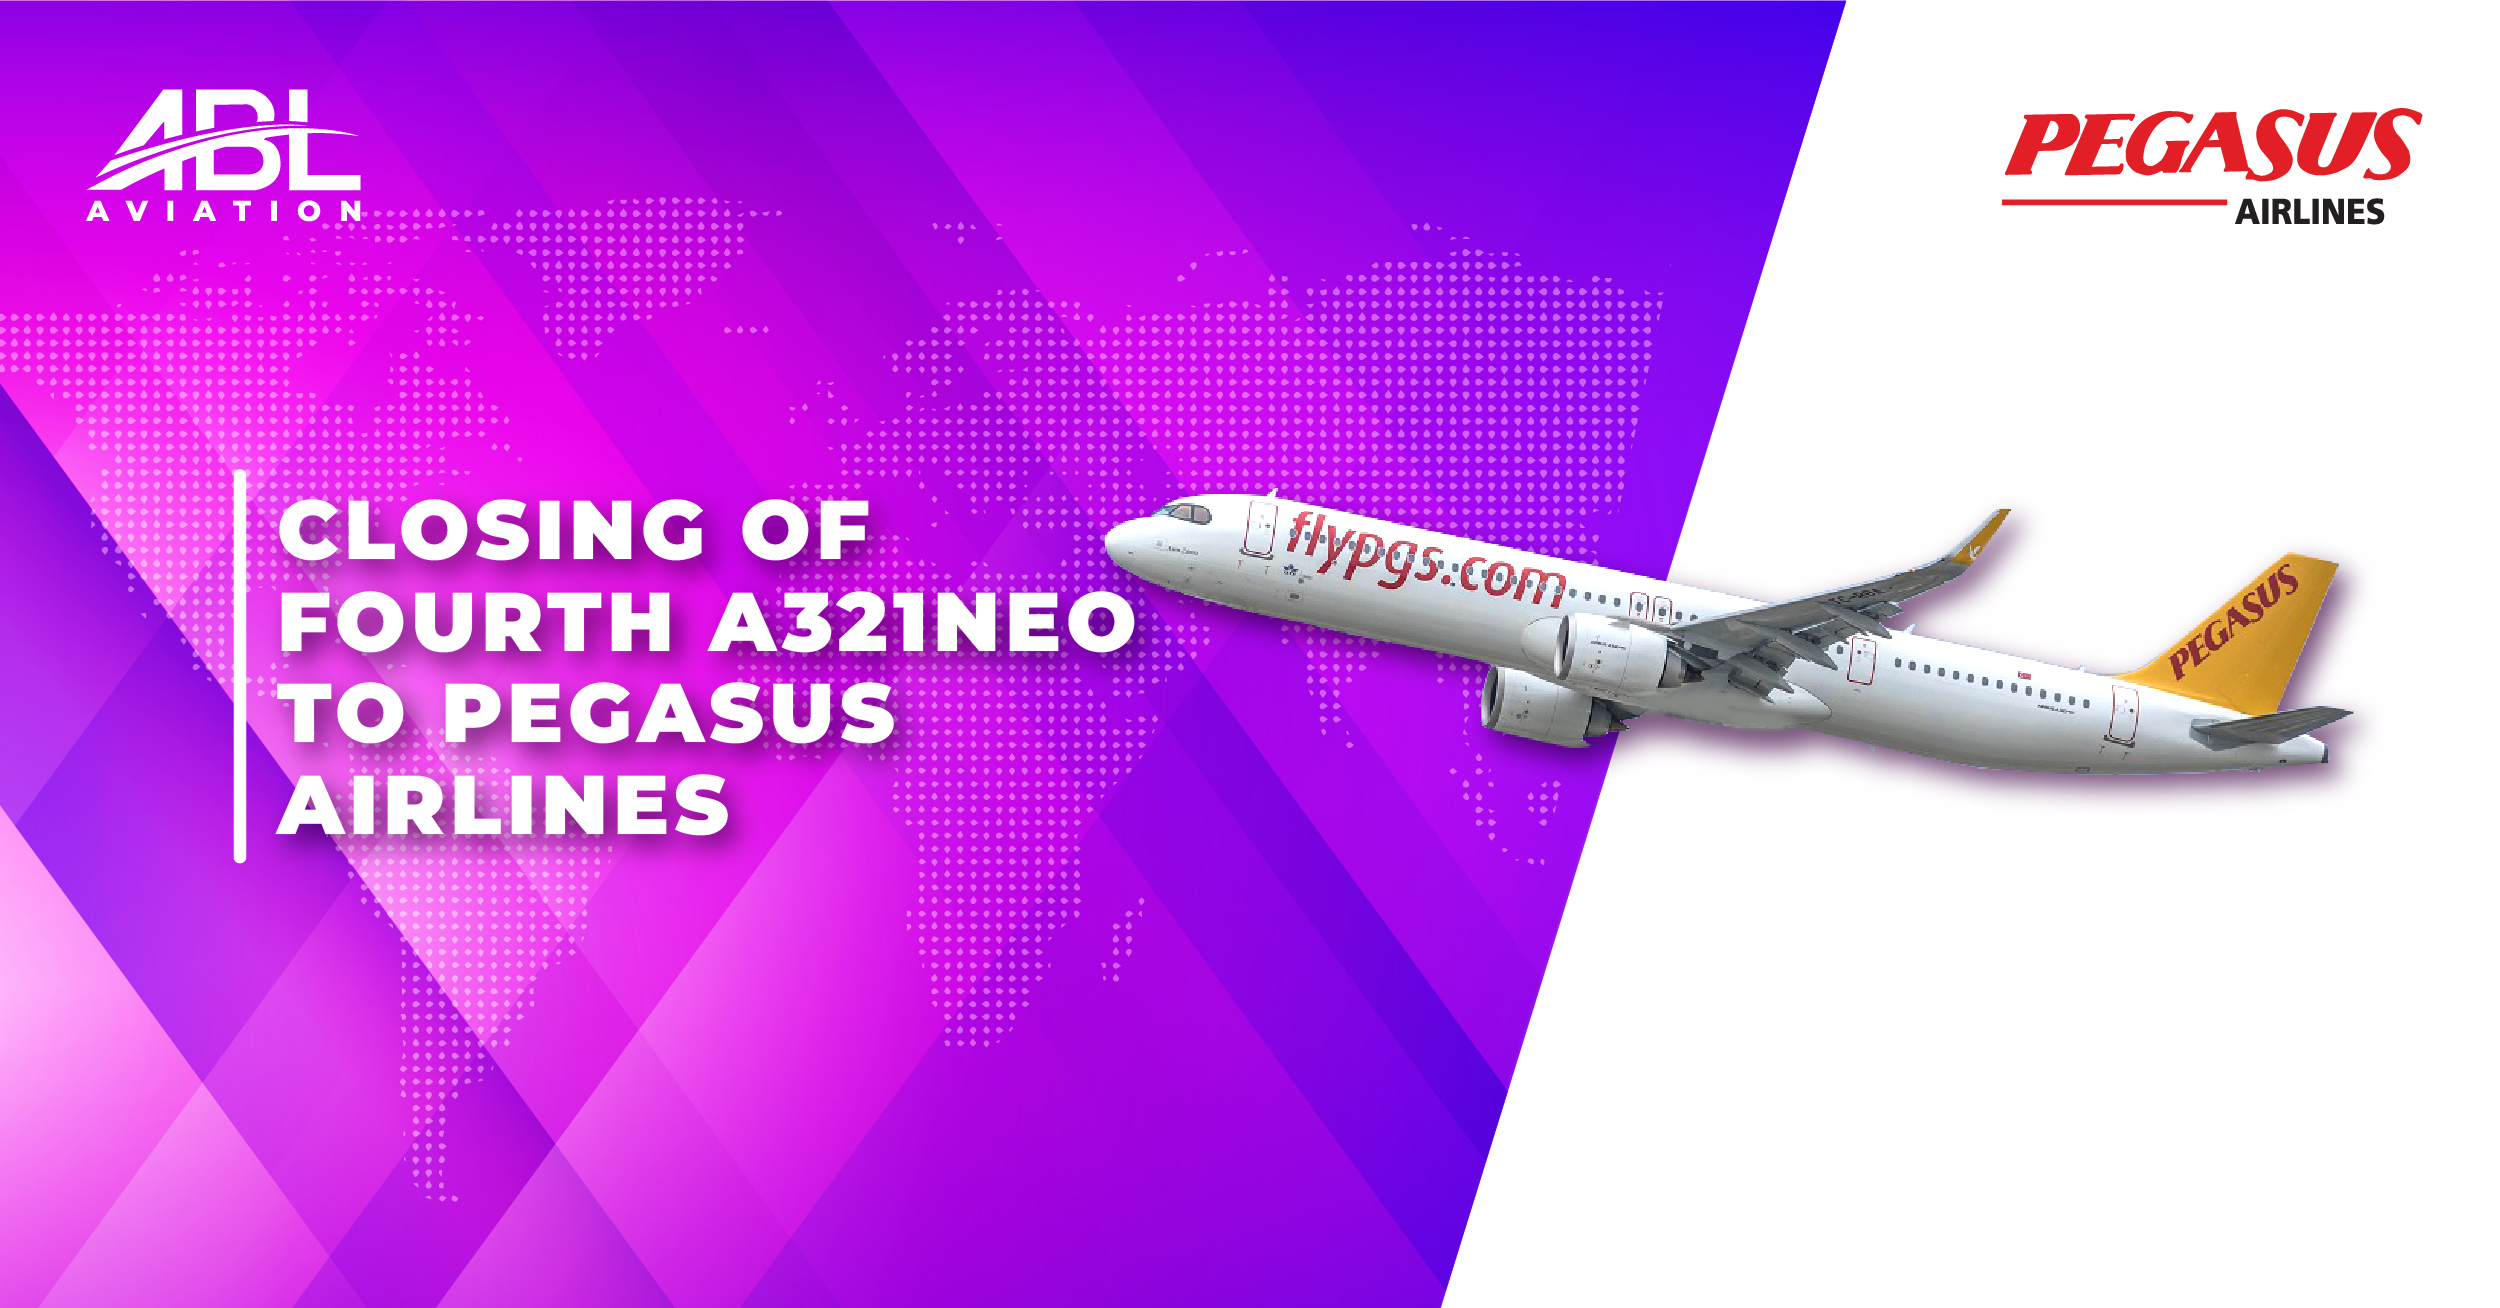 ABL Aviation Announces the Closing of the Fourth A321neo to Pegasus Airlines